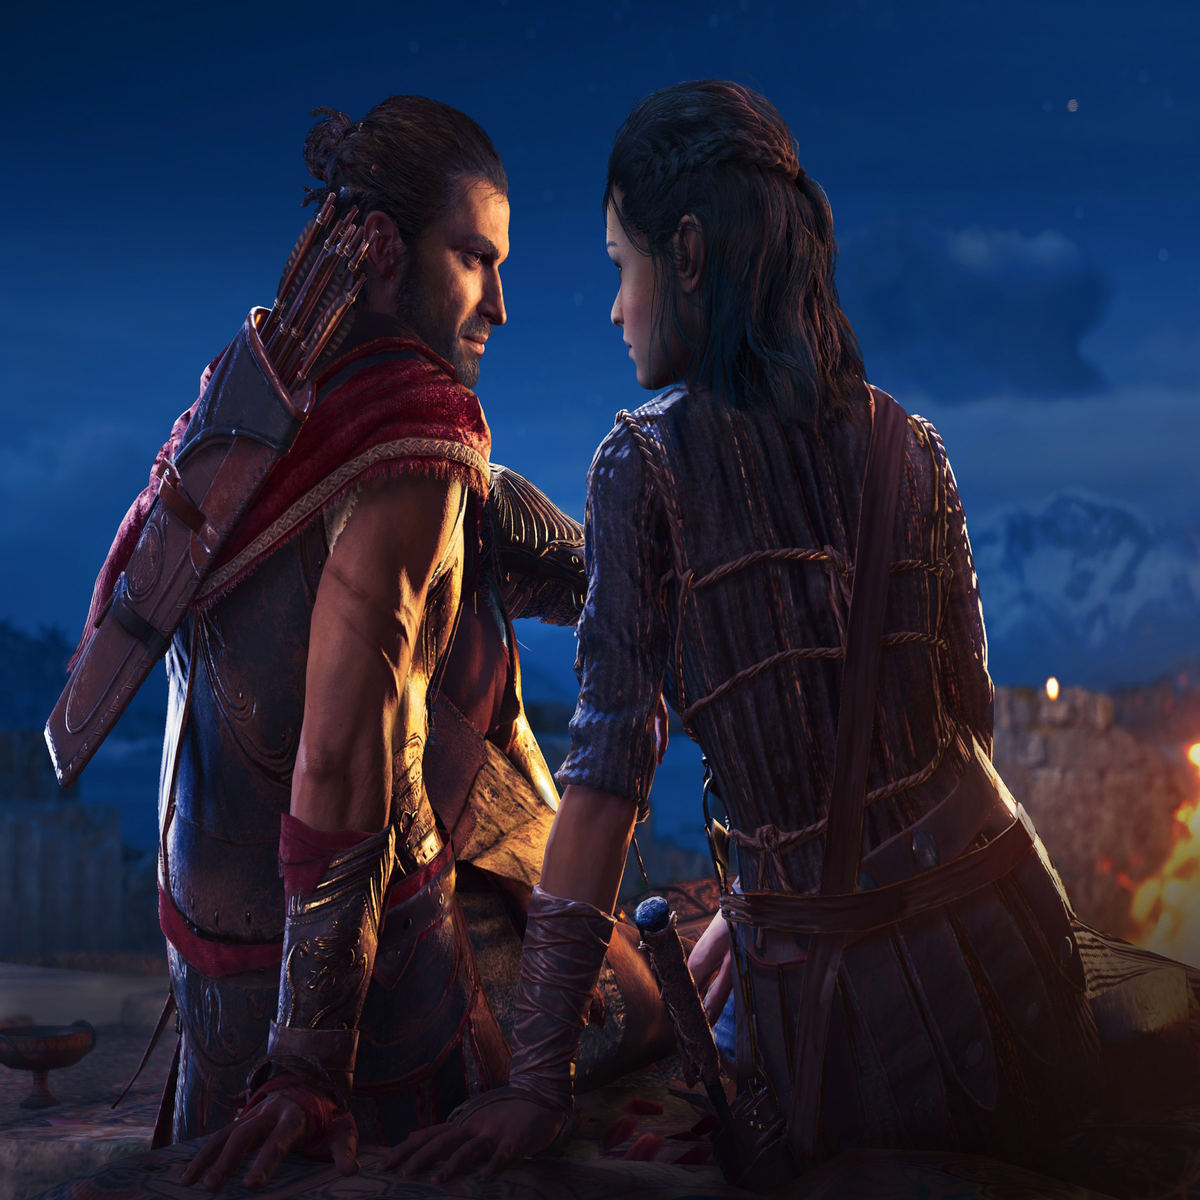 6 new features in 'Assassin's Creed: Odyssey